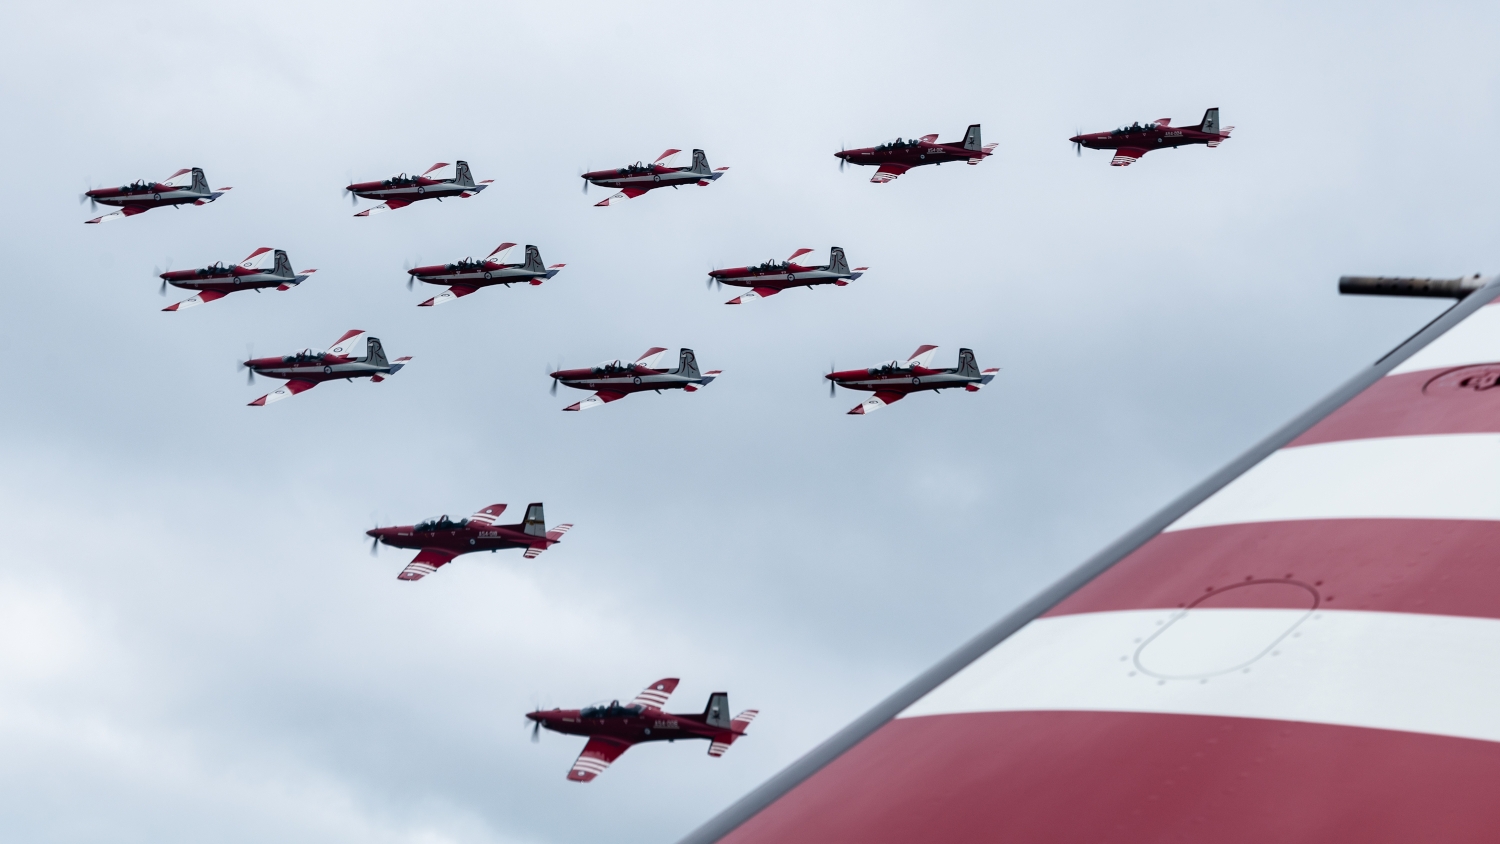 Roulettes flying in formation.